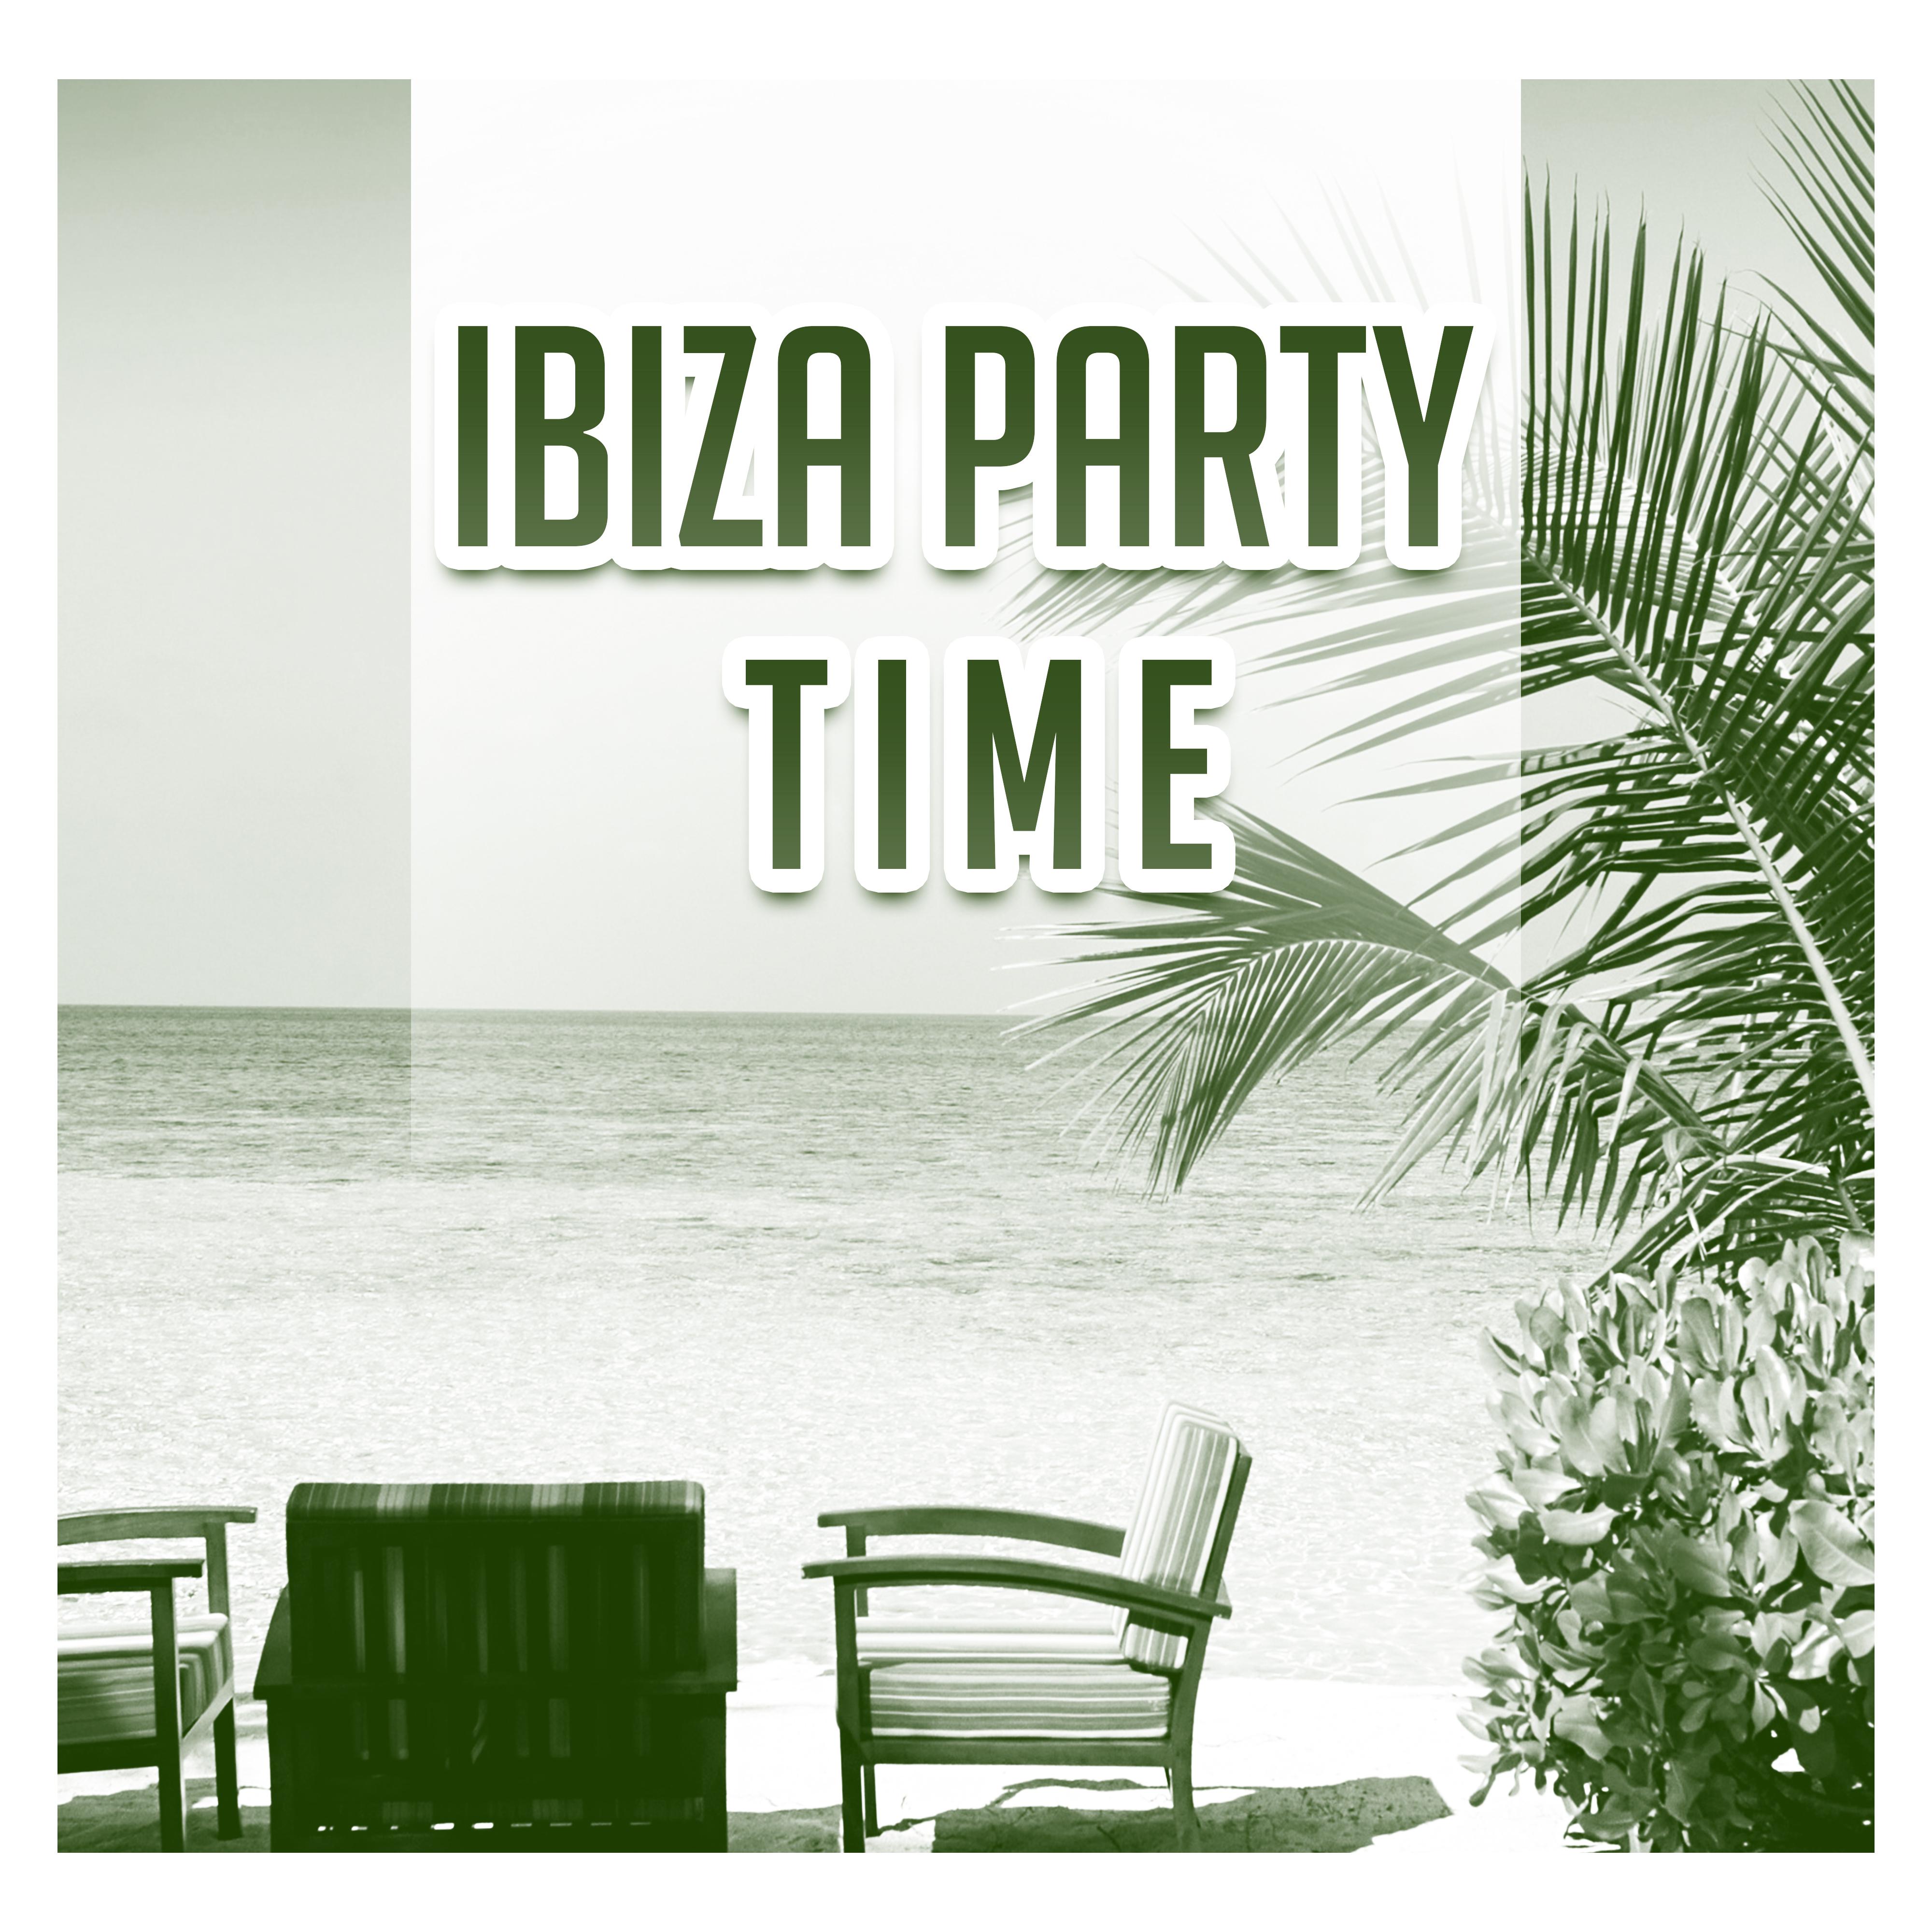 Ibiza Party Time  Ibiza Beach Party, Sounds to Have Fun, Summer Vibes, Chill Out All Night